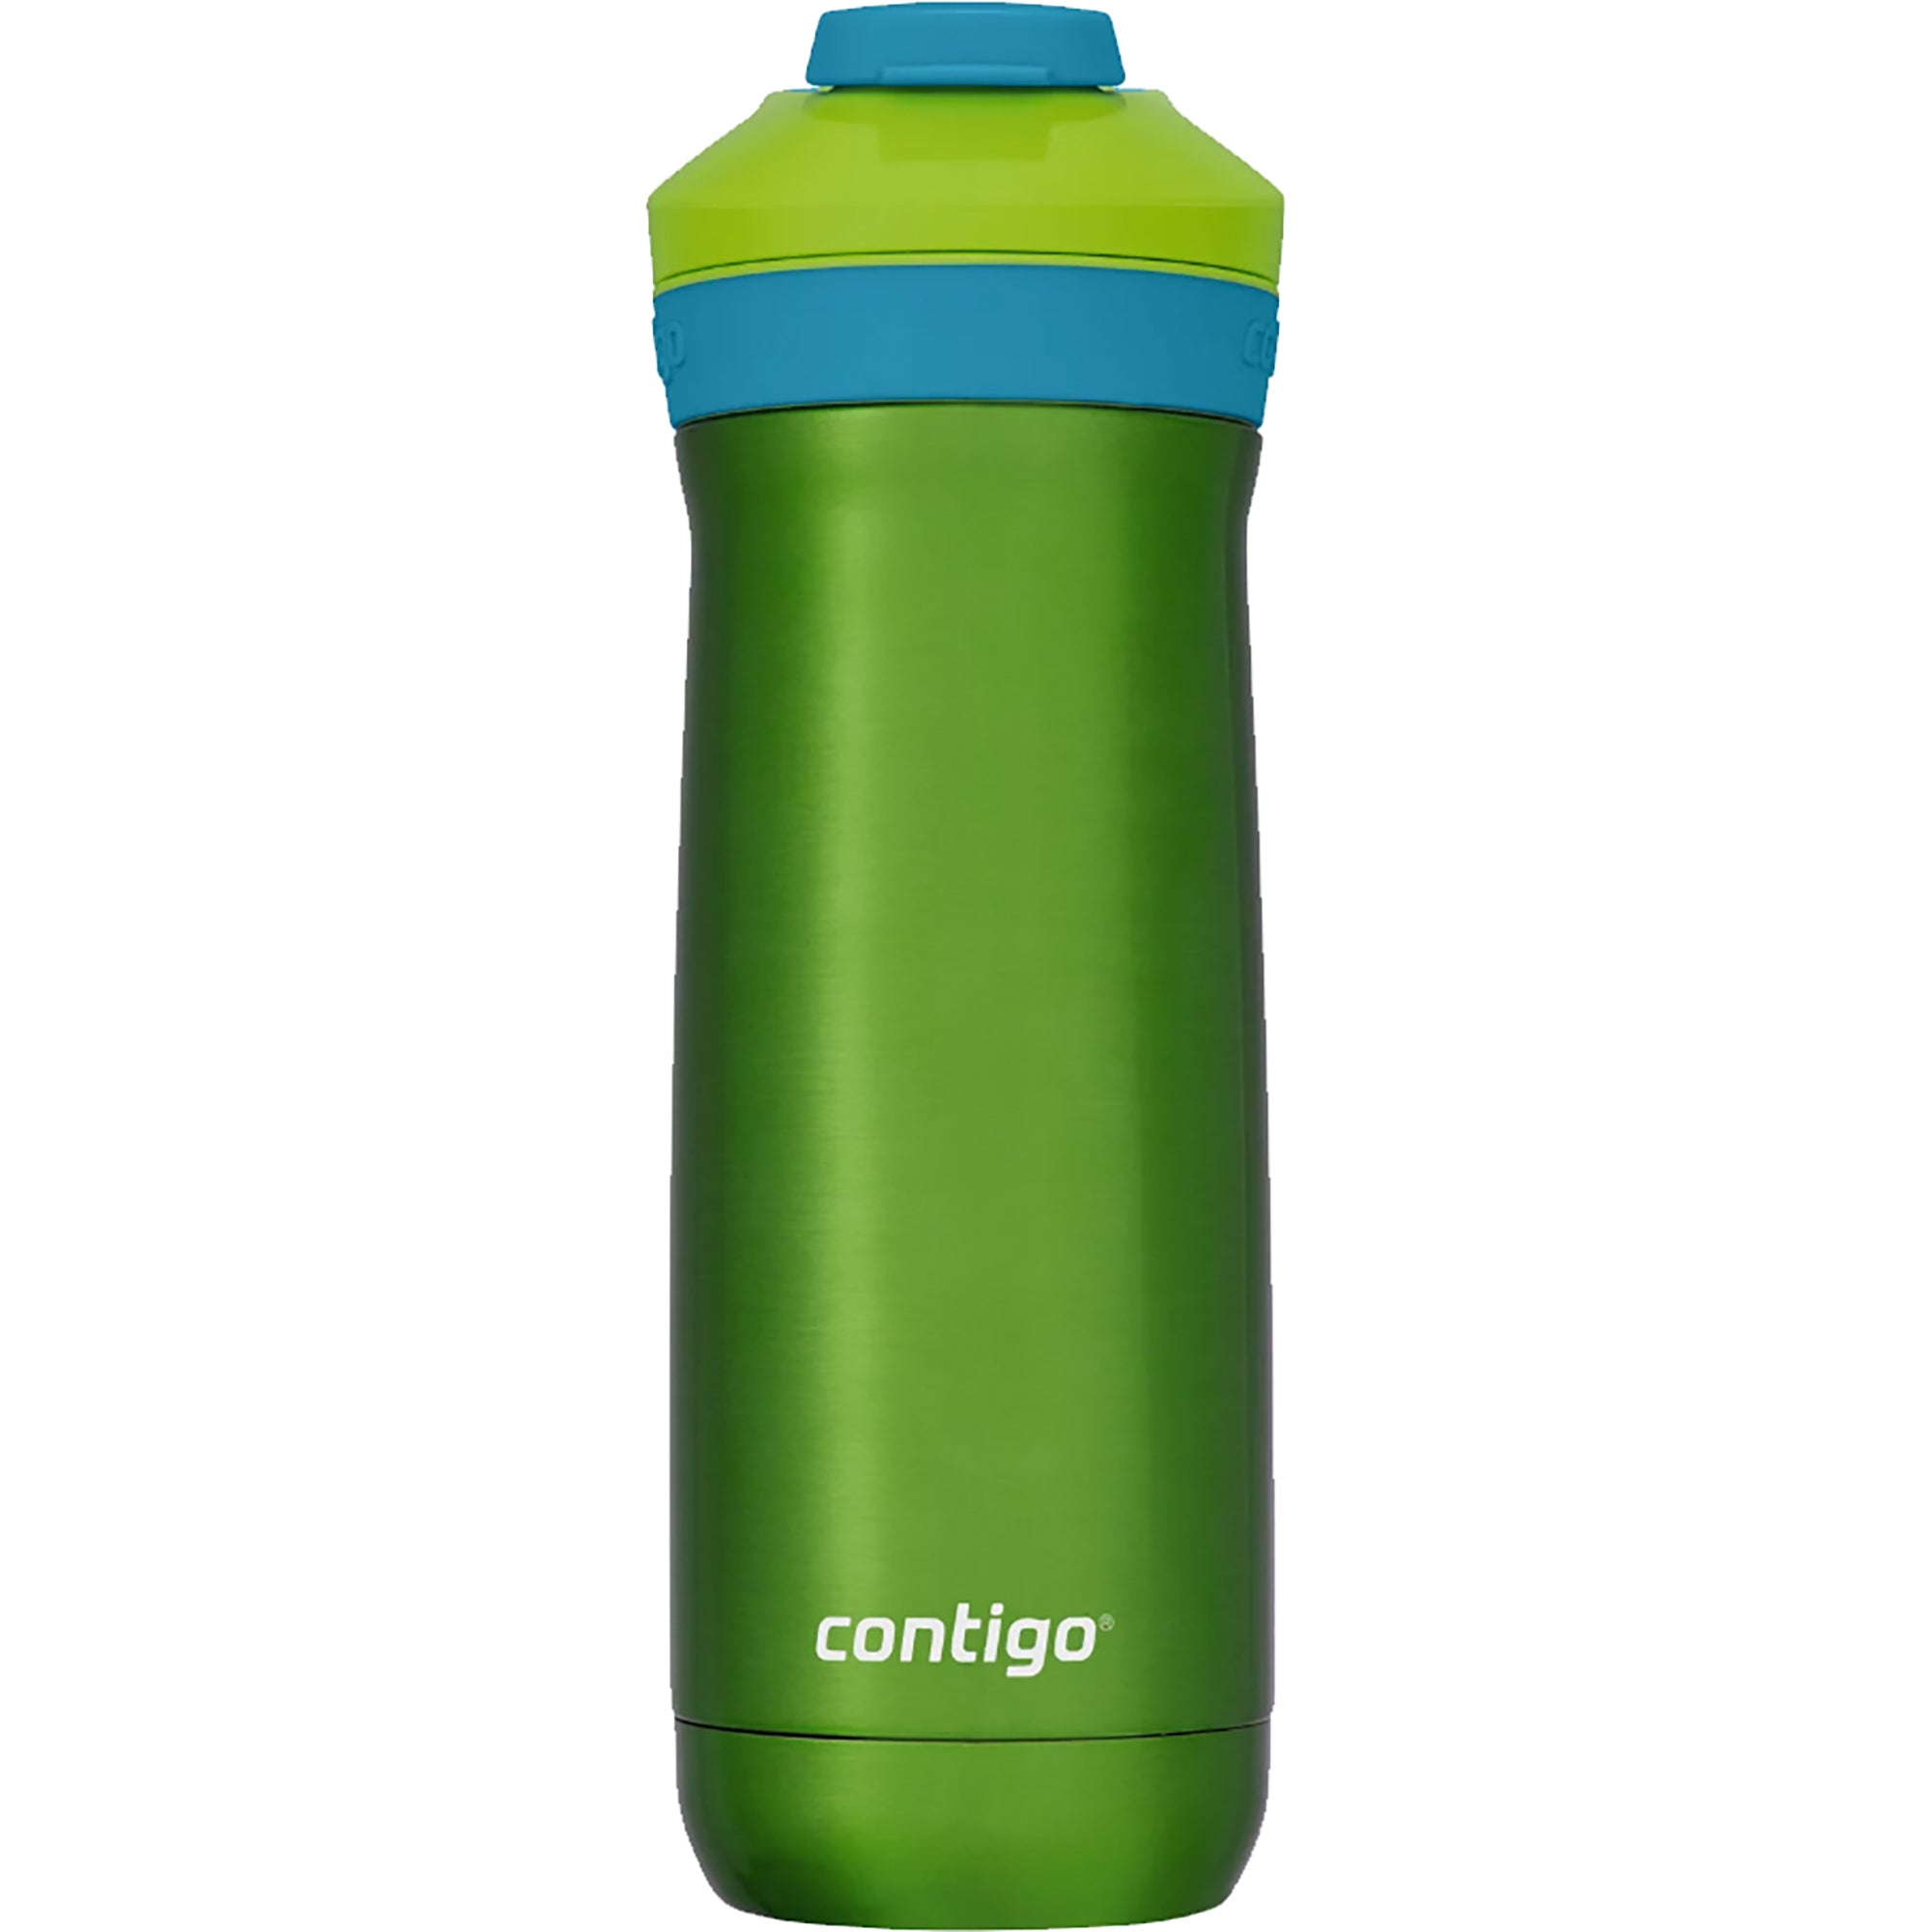 Contigo Kids 20 oz Micah Water Bottle with Simple Lid - Cool Lime Pineapple